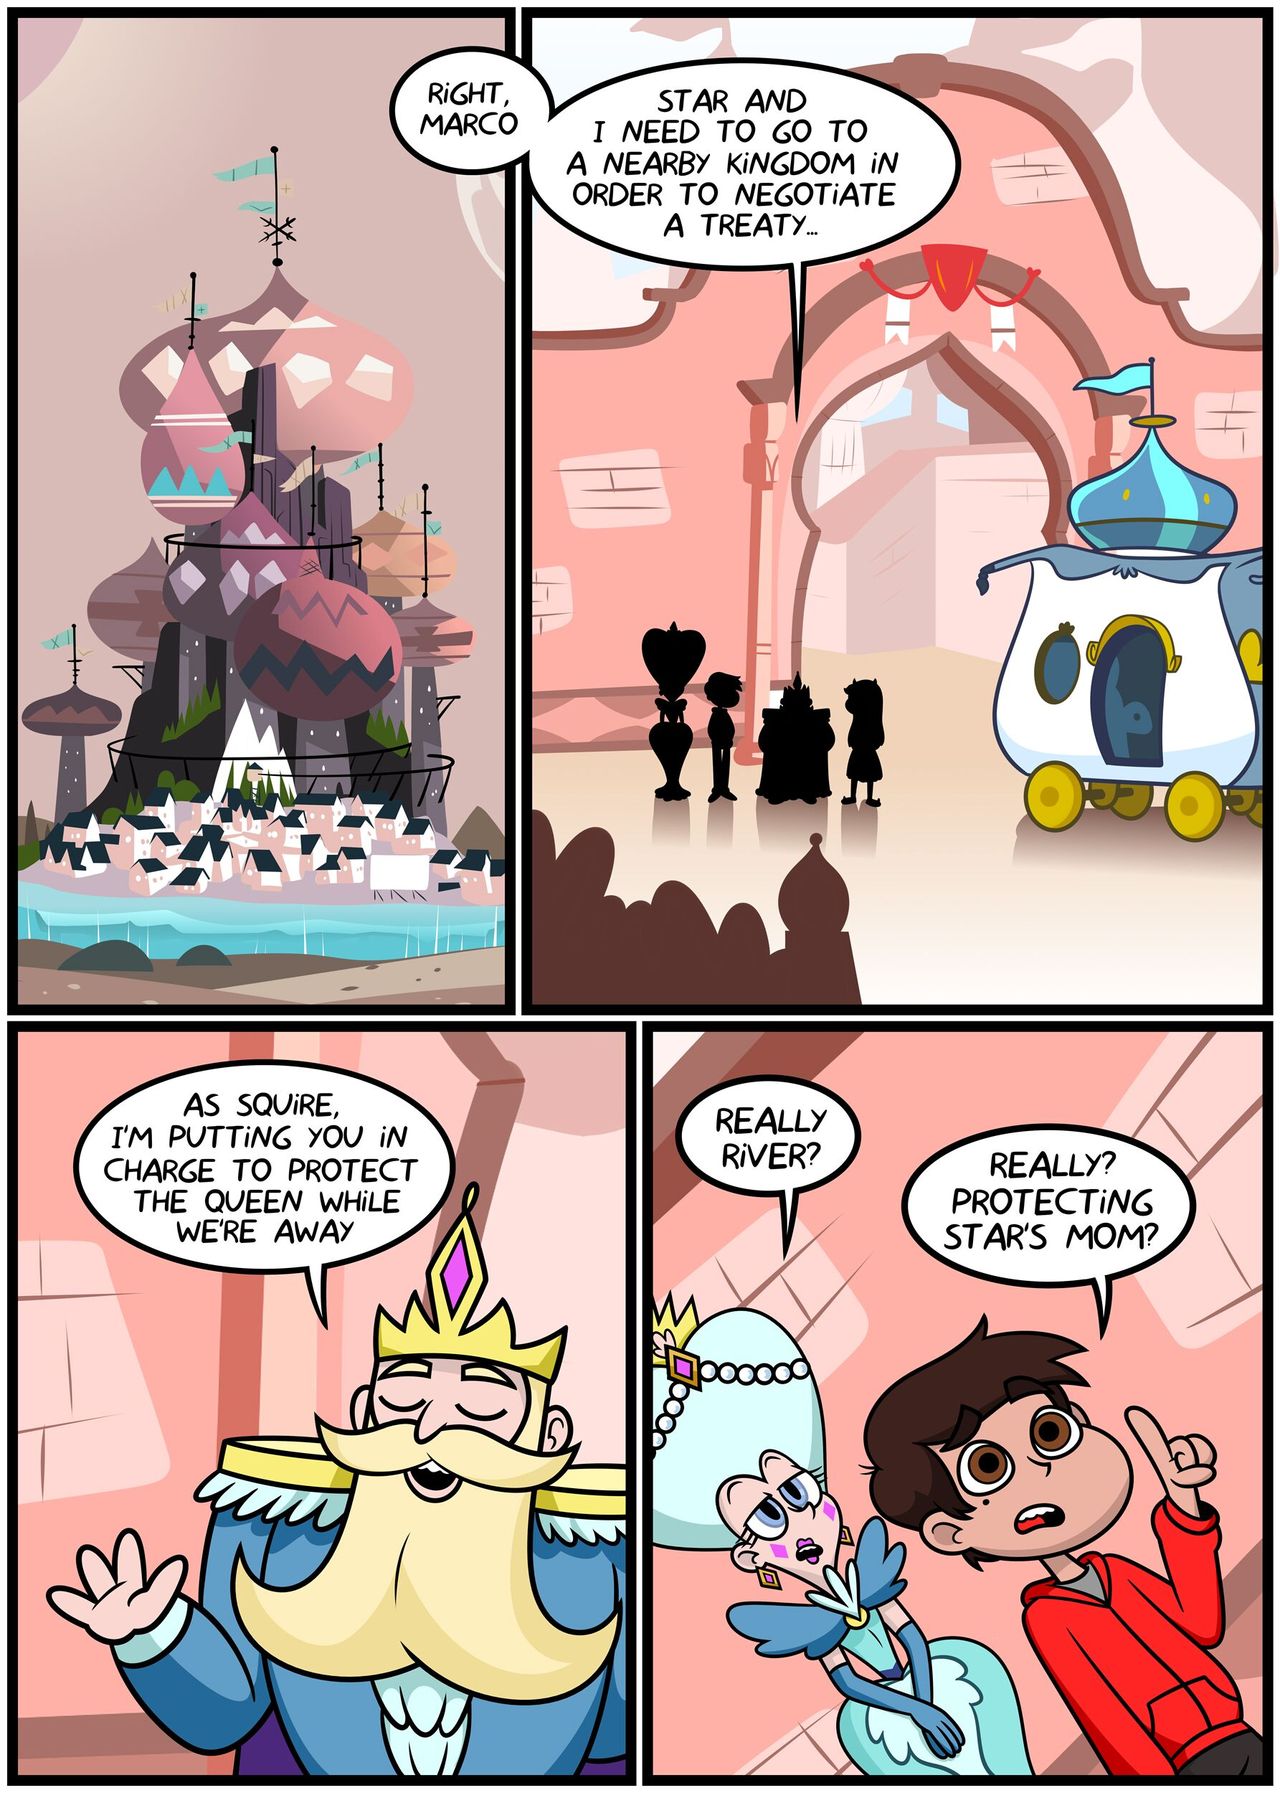 Alone With The Queen (Star Vs The Forces Of Evil) Xierra099 - FreeAdultComix